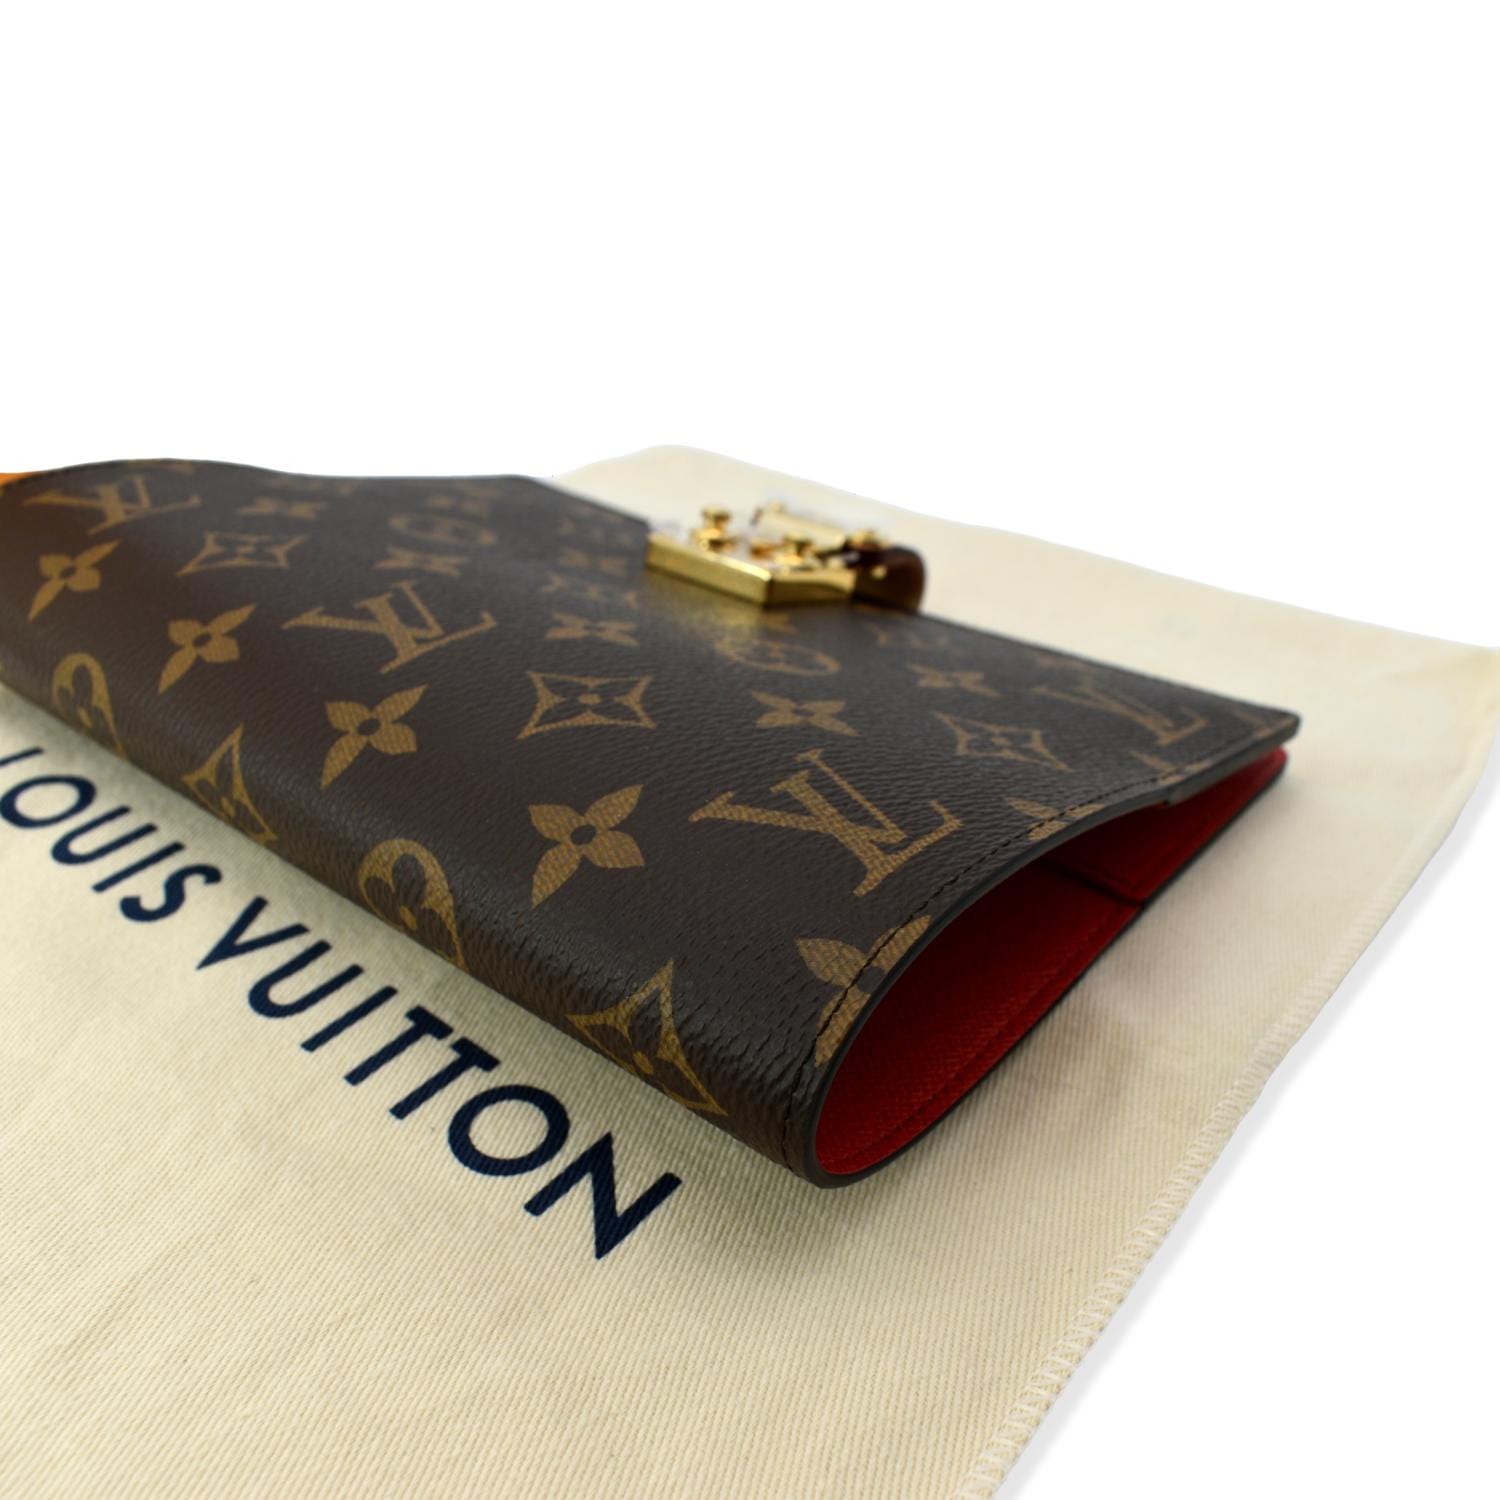 Luxury Notebook Cover, Lv Notebook Leather, Luxury Mb Notebook